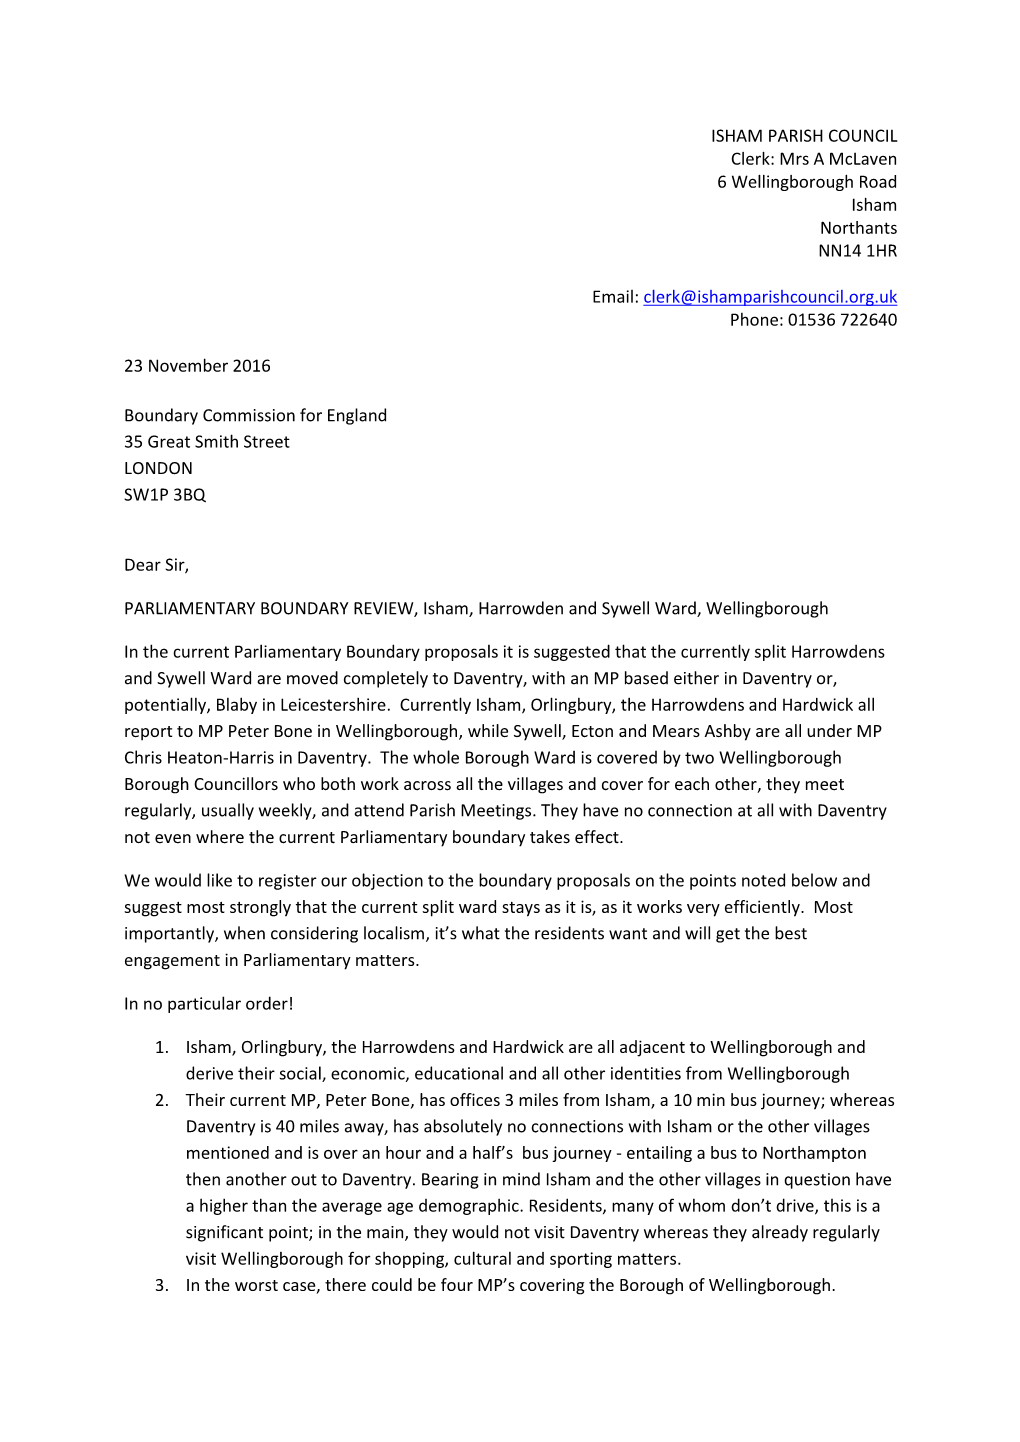 Letter to Boundary Commission